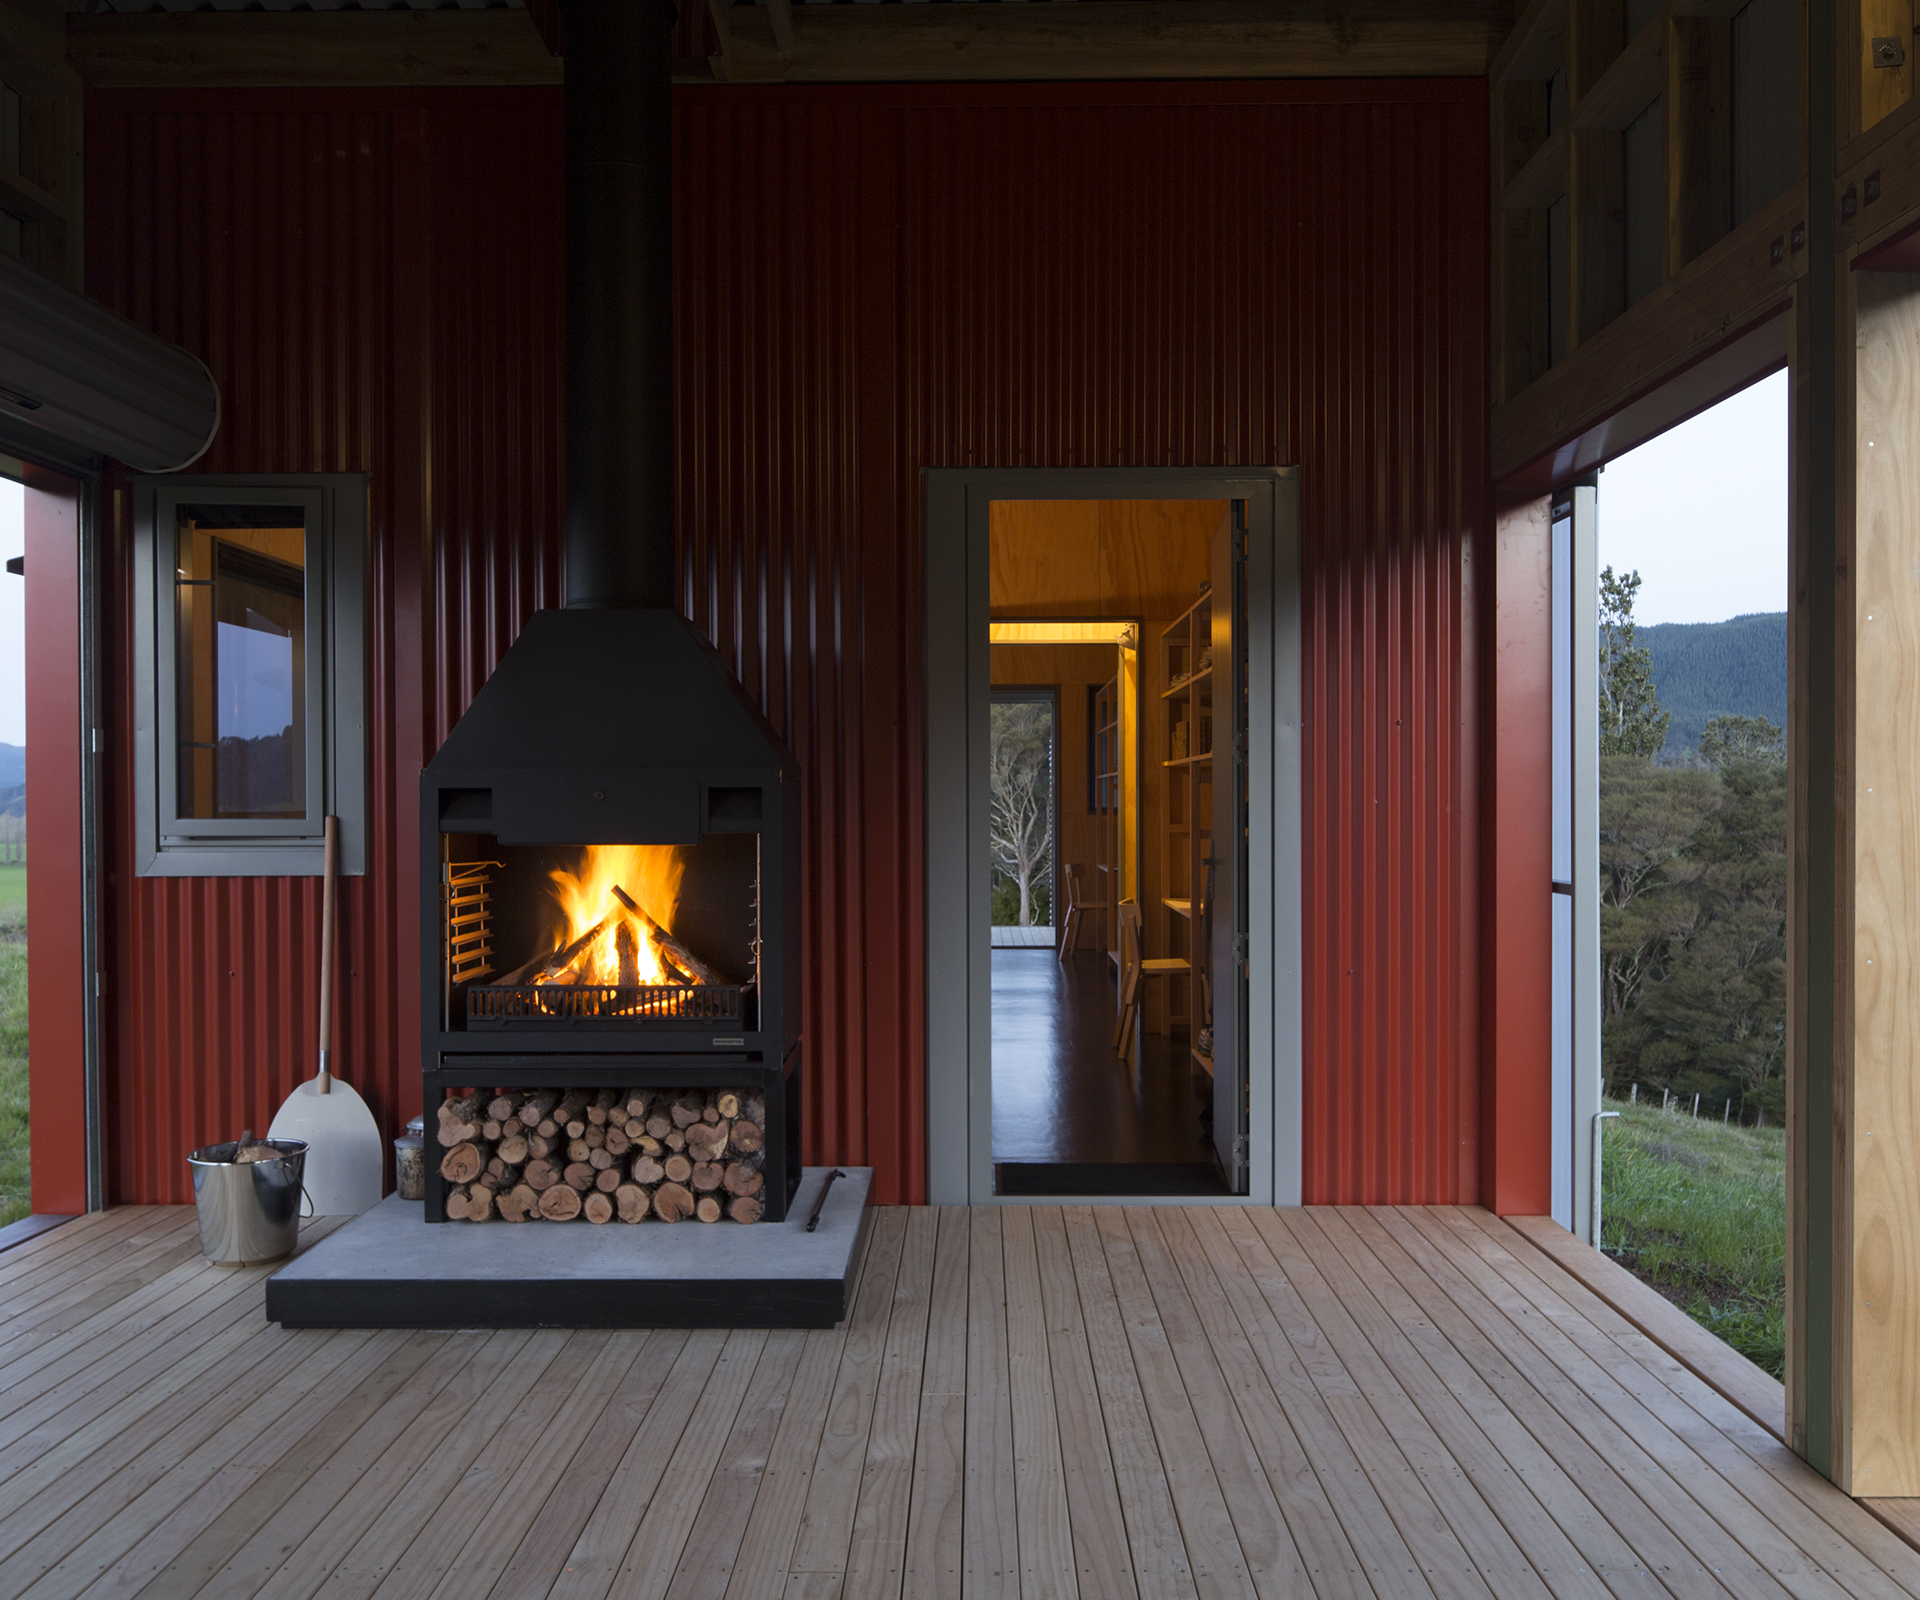 On the central covered deck, the fireplace by Fires by Design provides warmth in all weathers. 